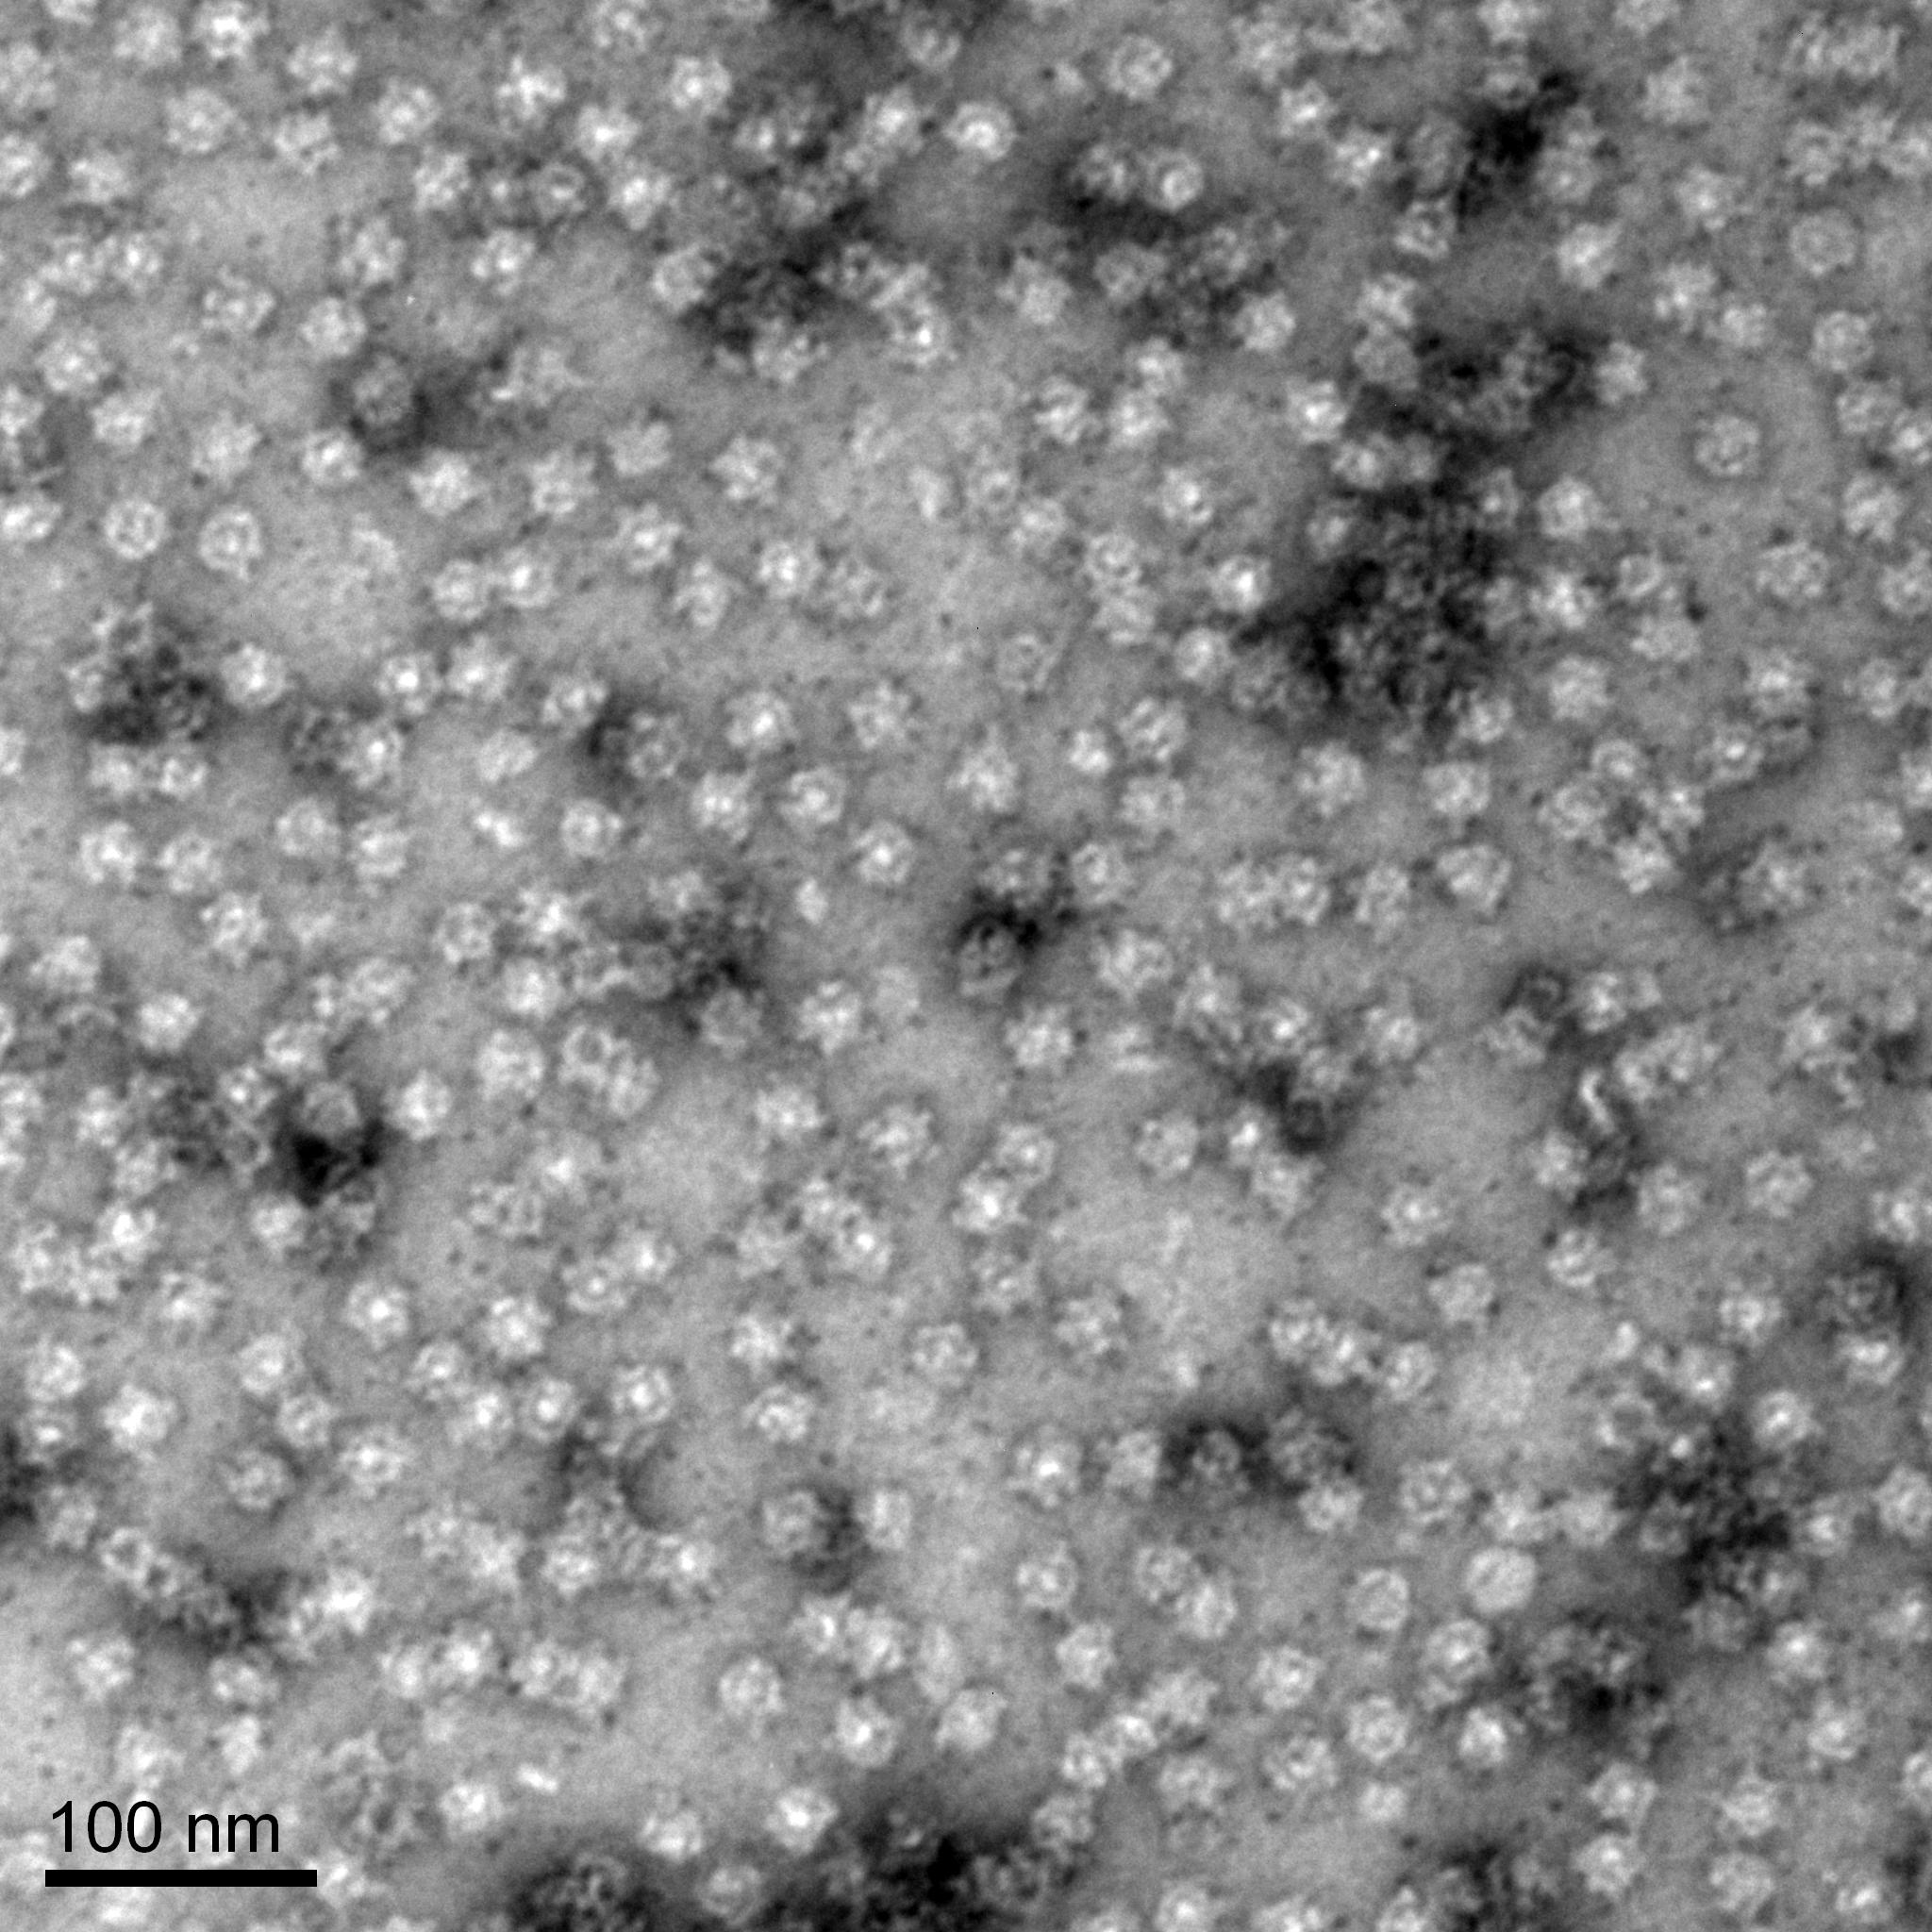 Grayscale microscope image of many starlike PNMA2 complexes. Image credit: Junjie Xu.